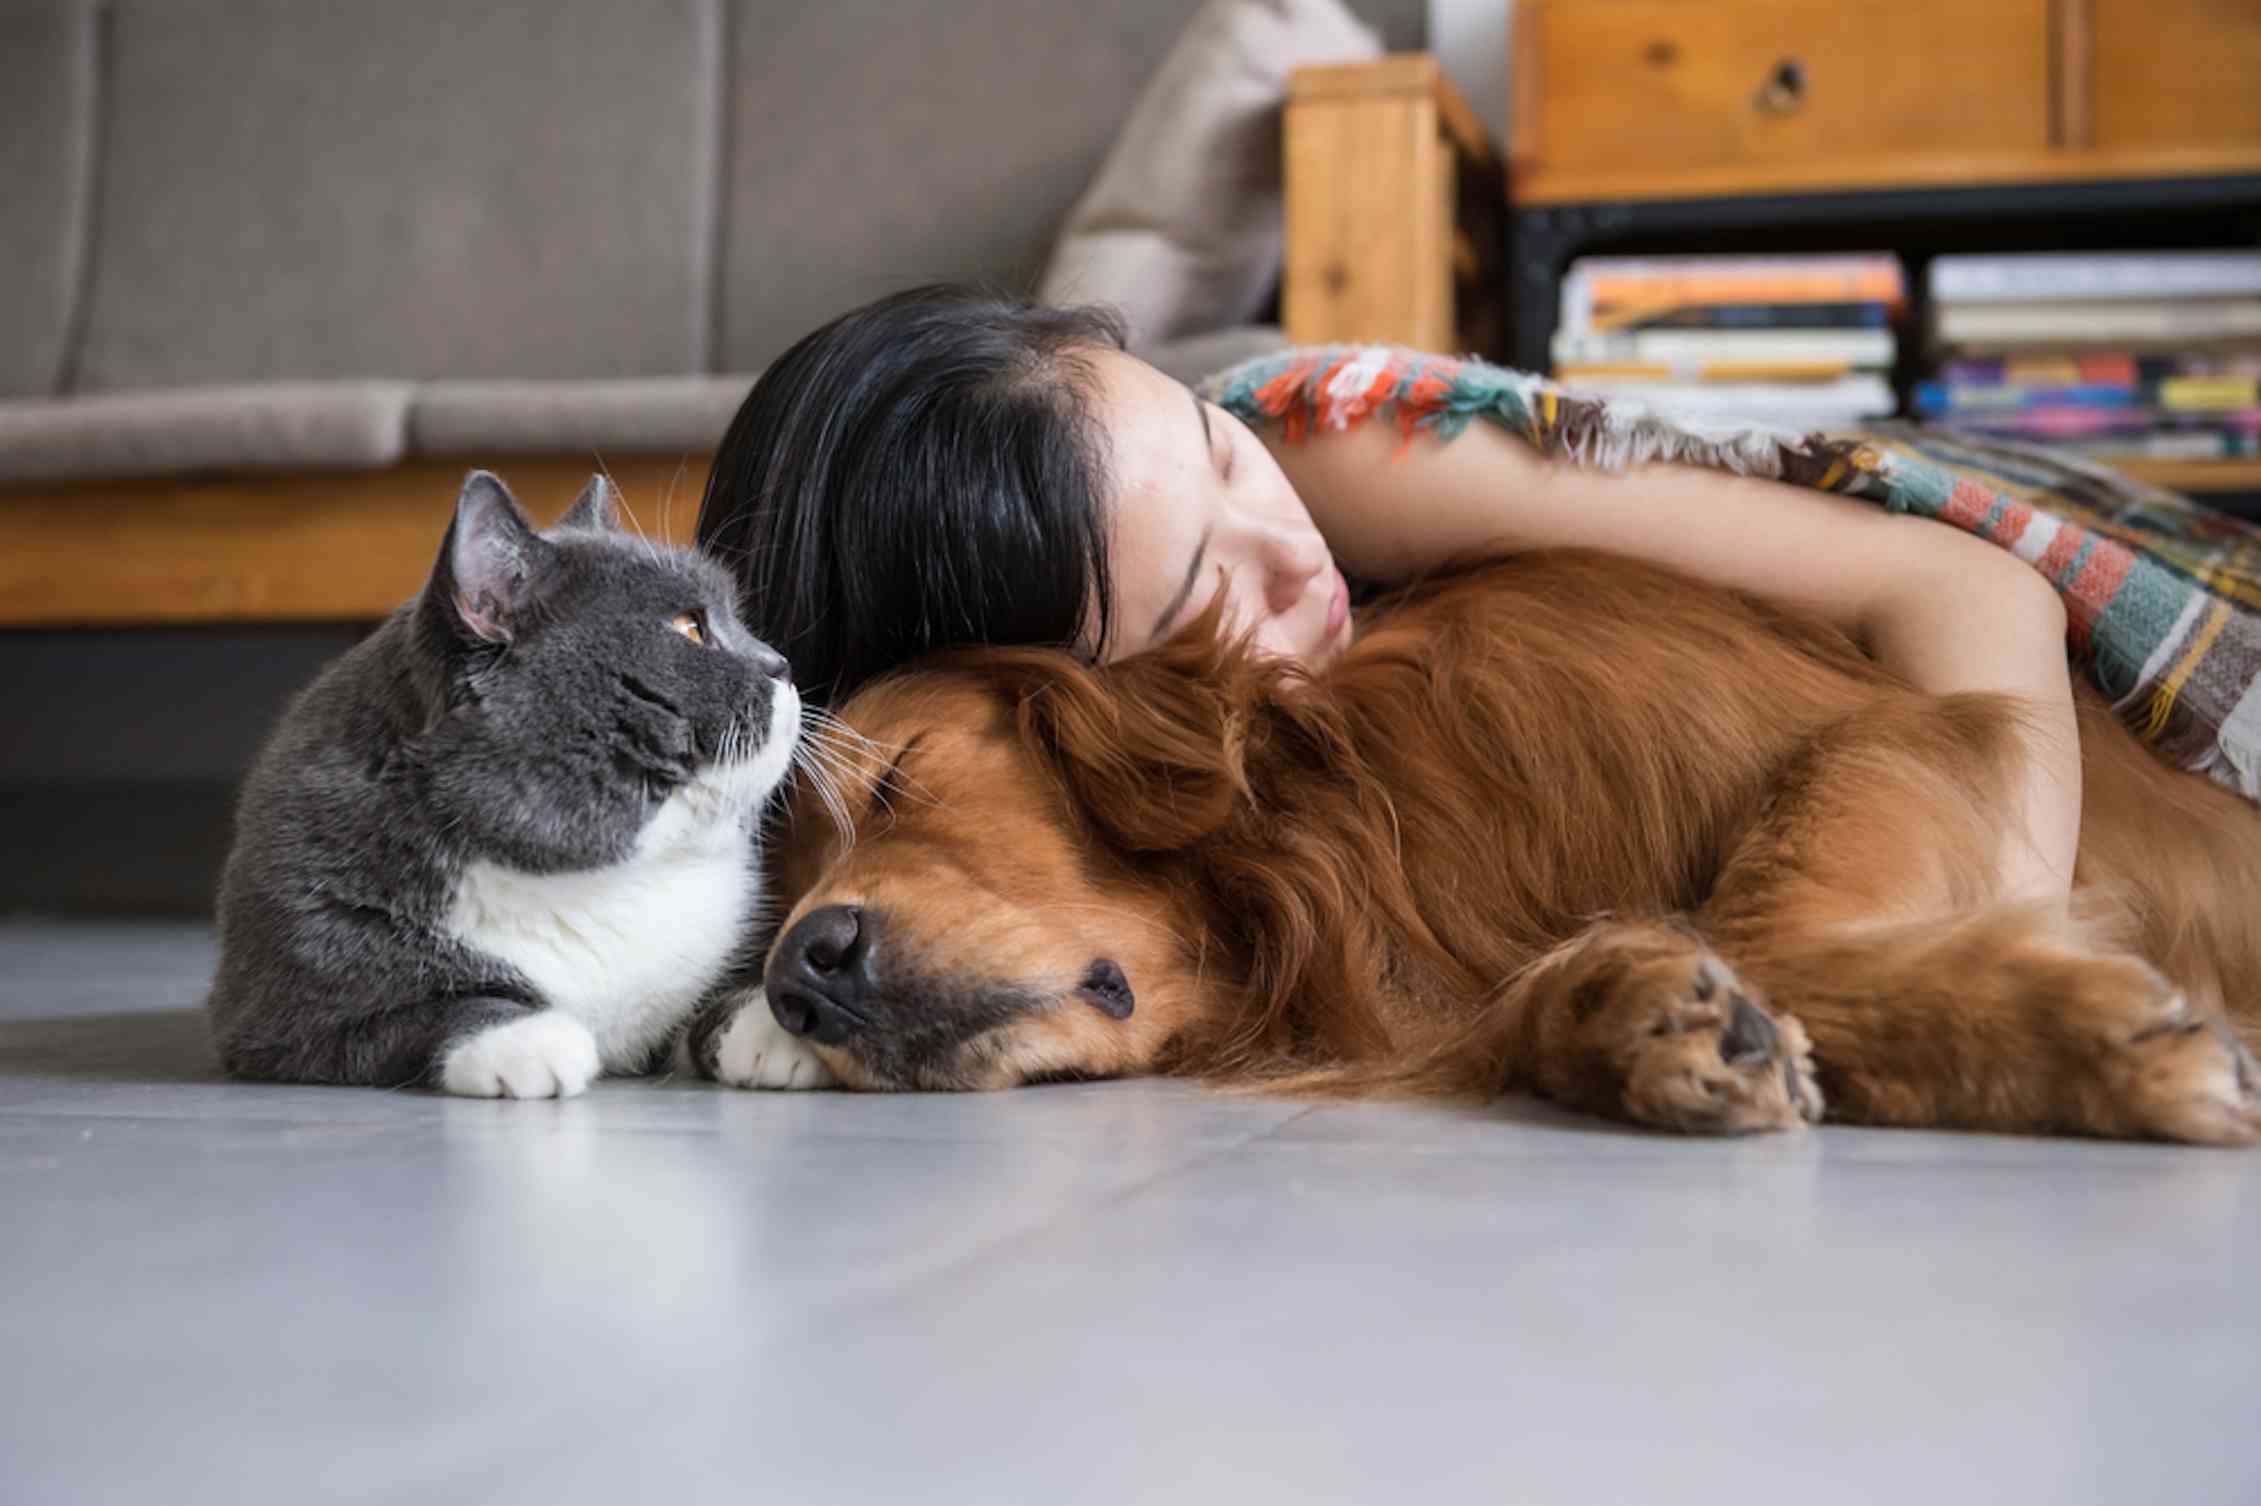 Just like humans, more cats and dogs are living with chronic health